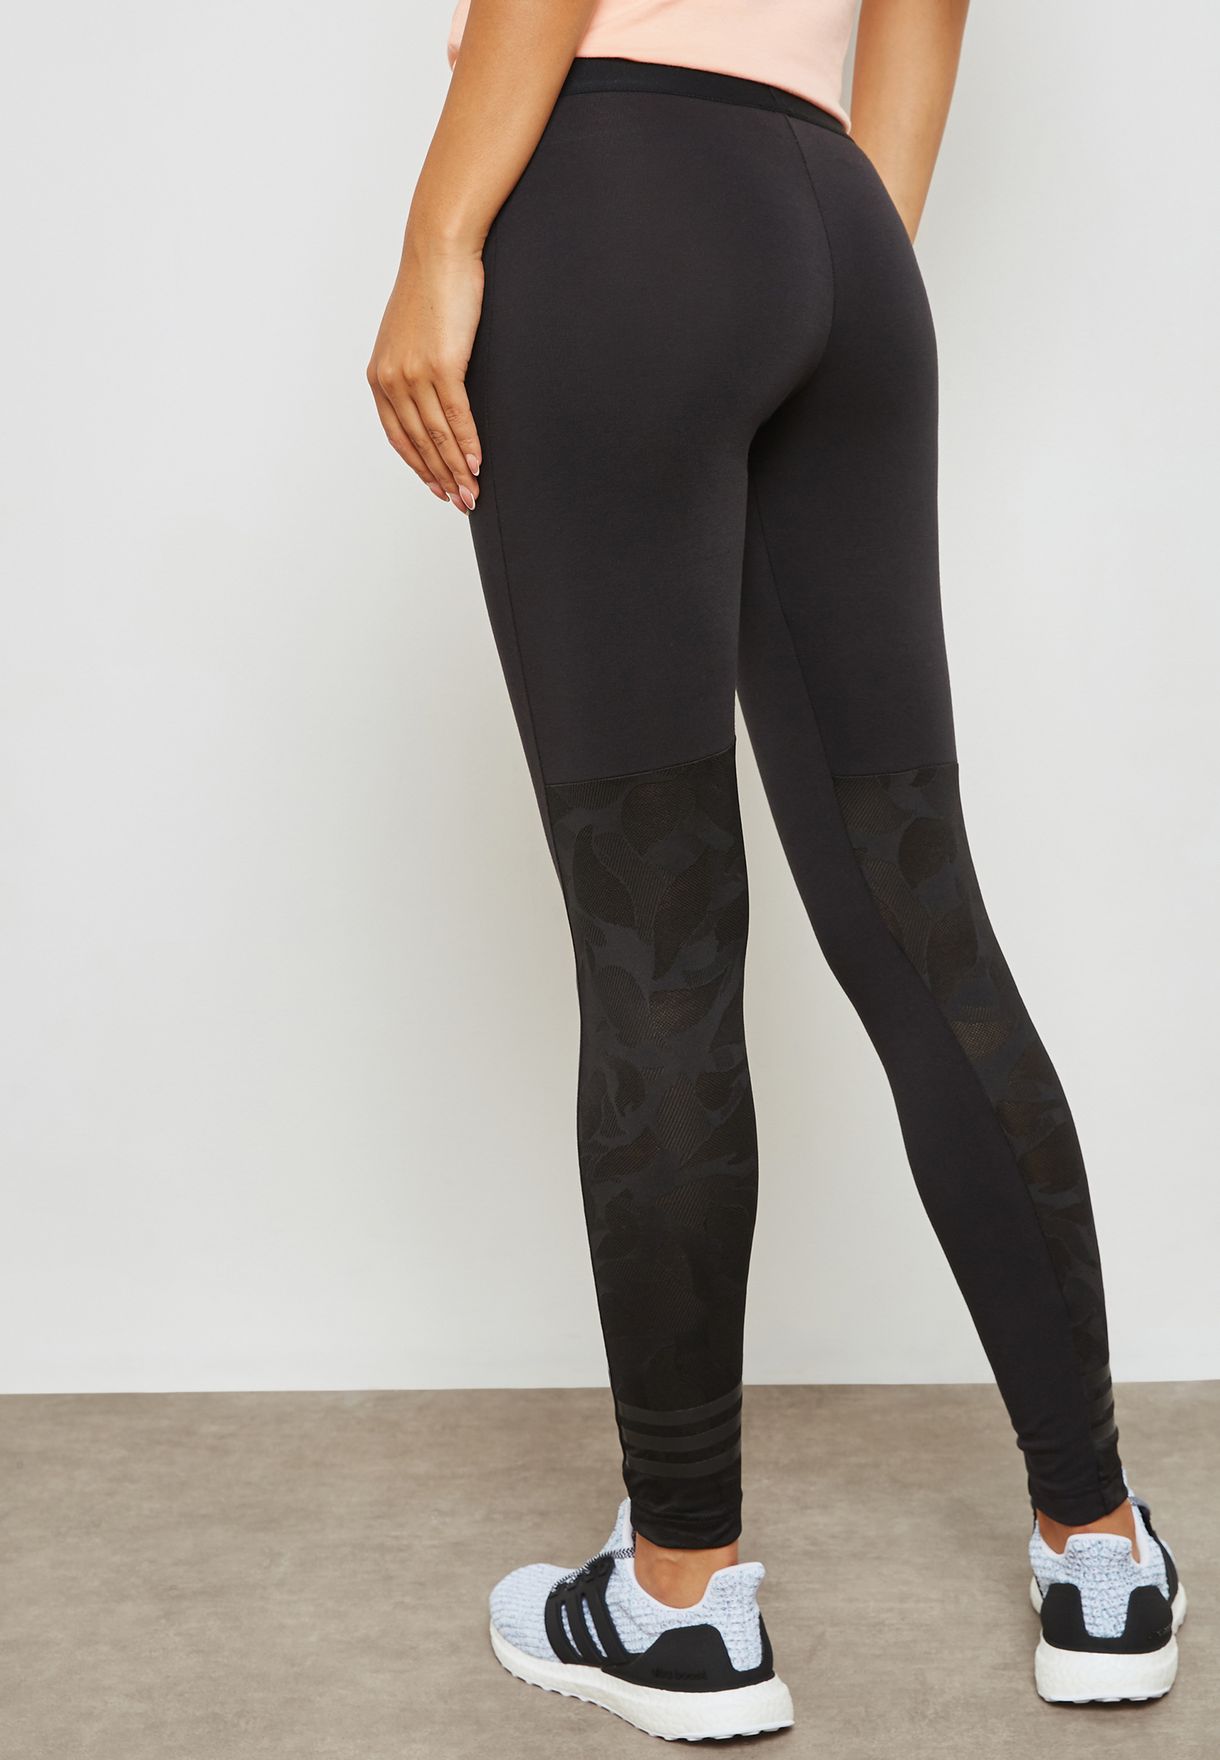 Mesh Tights Leggings Adidas Outlet